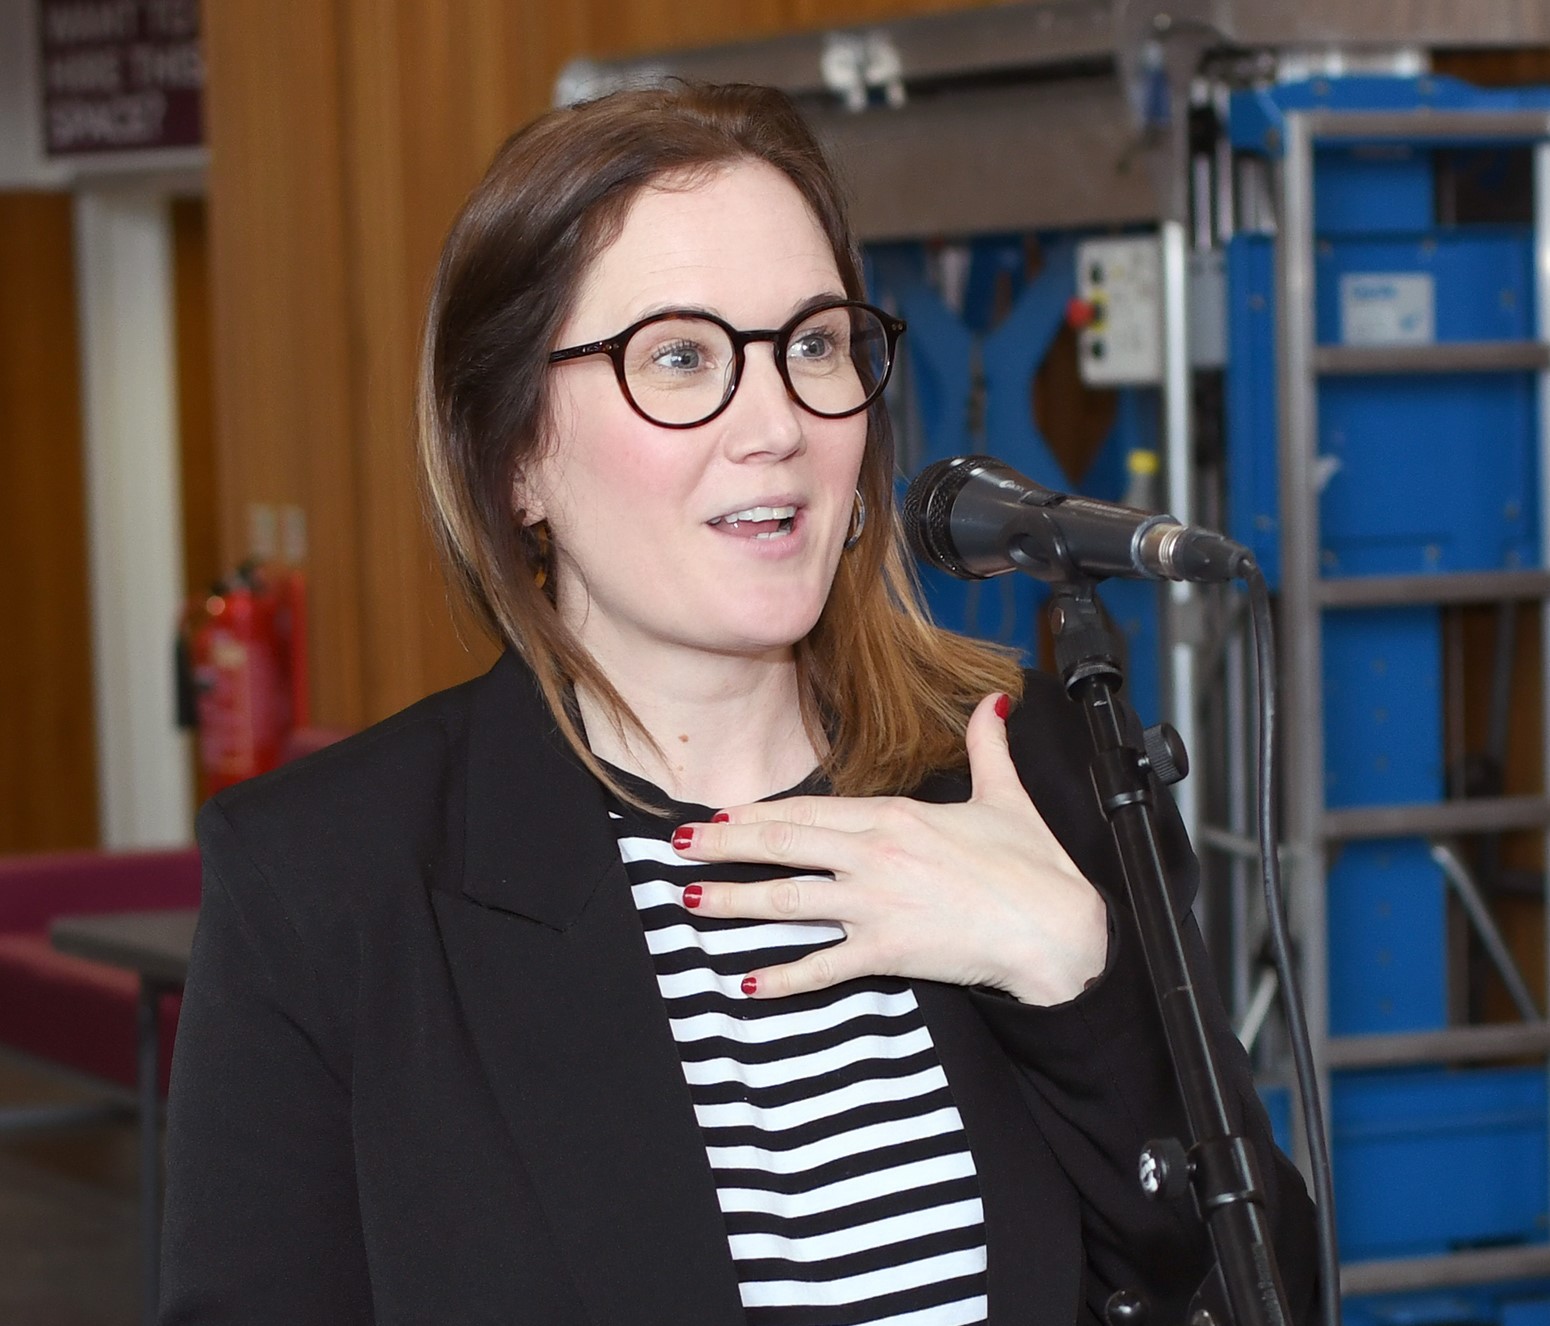 Photo of Sarah in a black blazer talking into a microphone